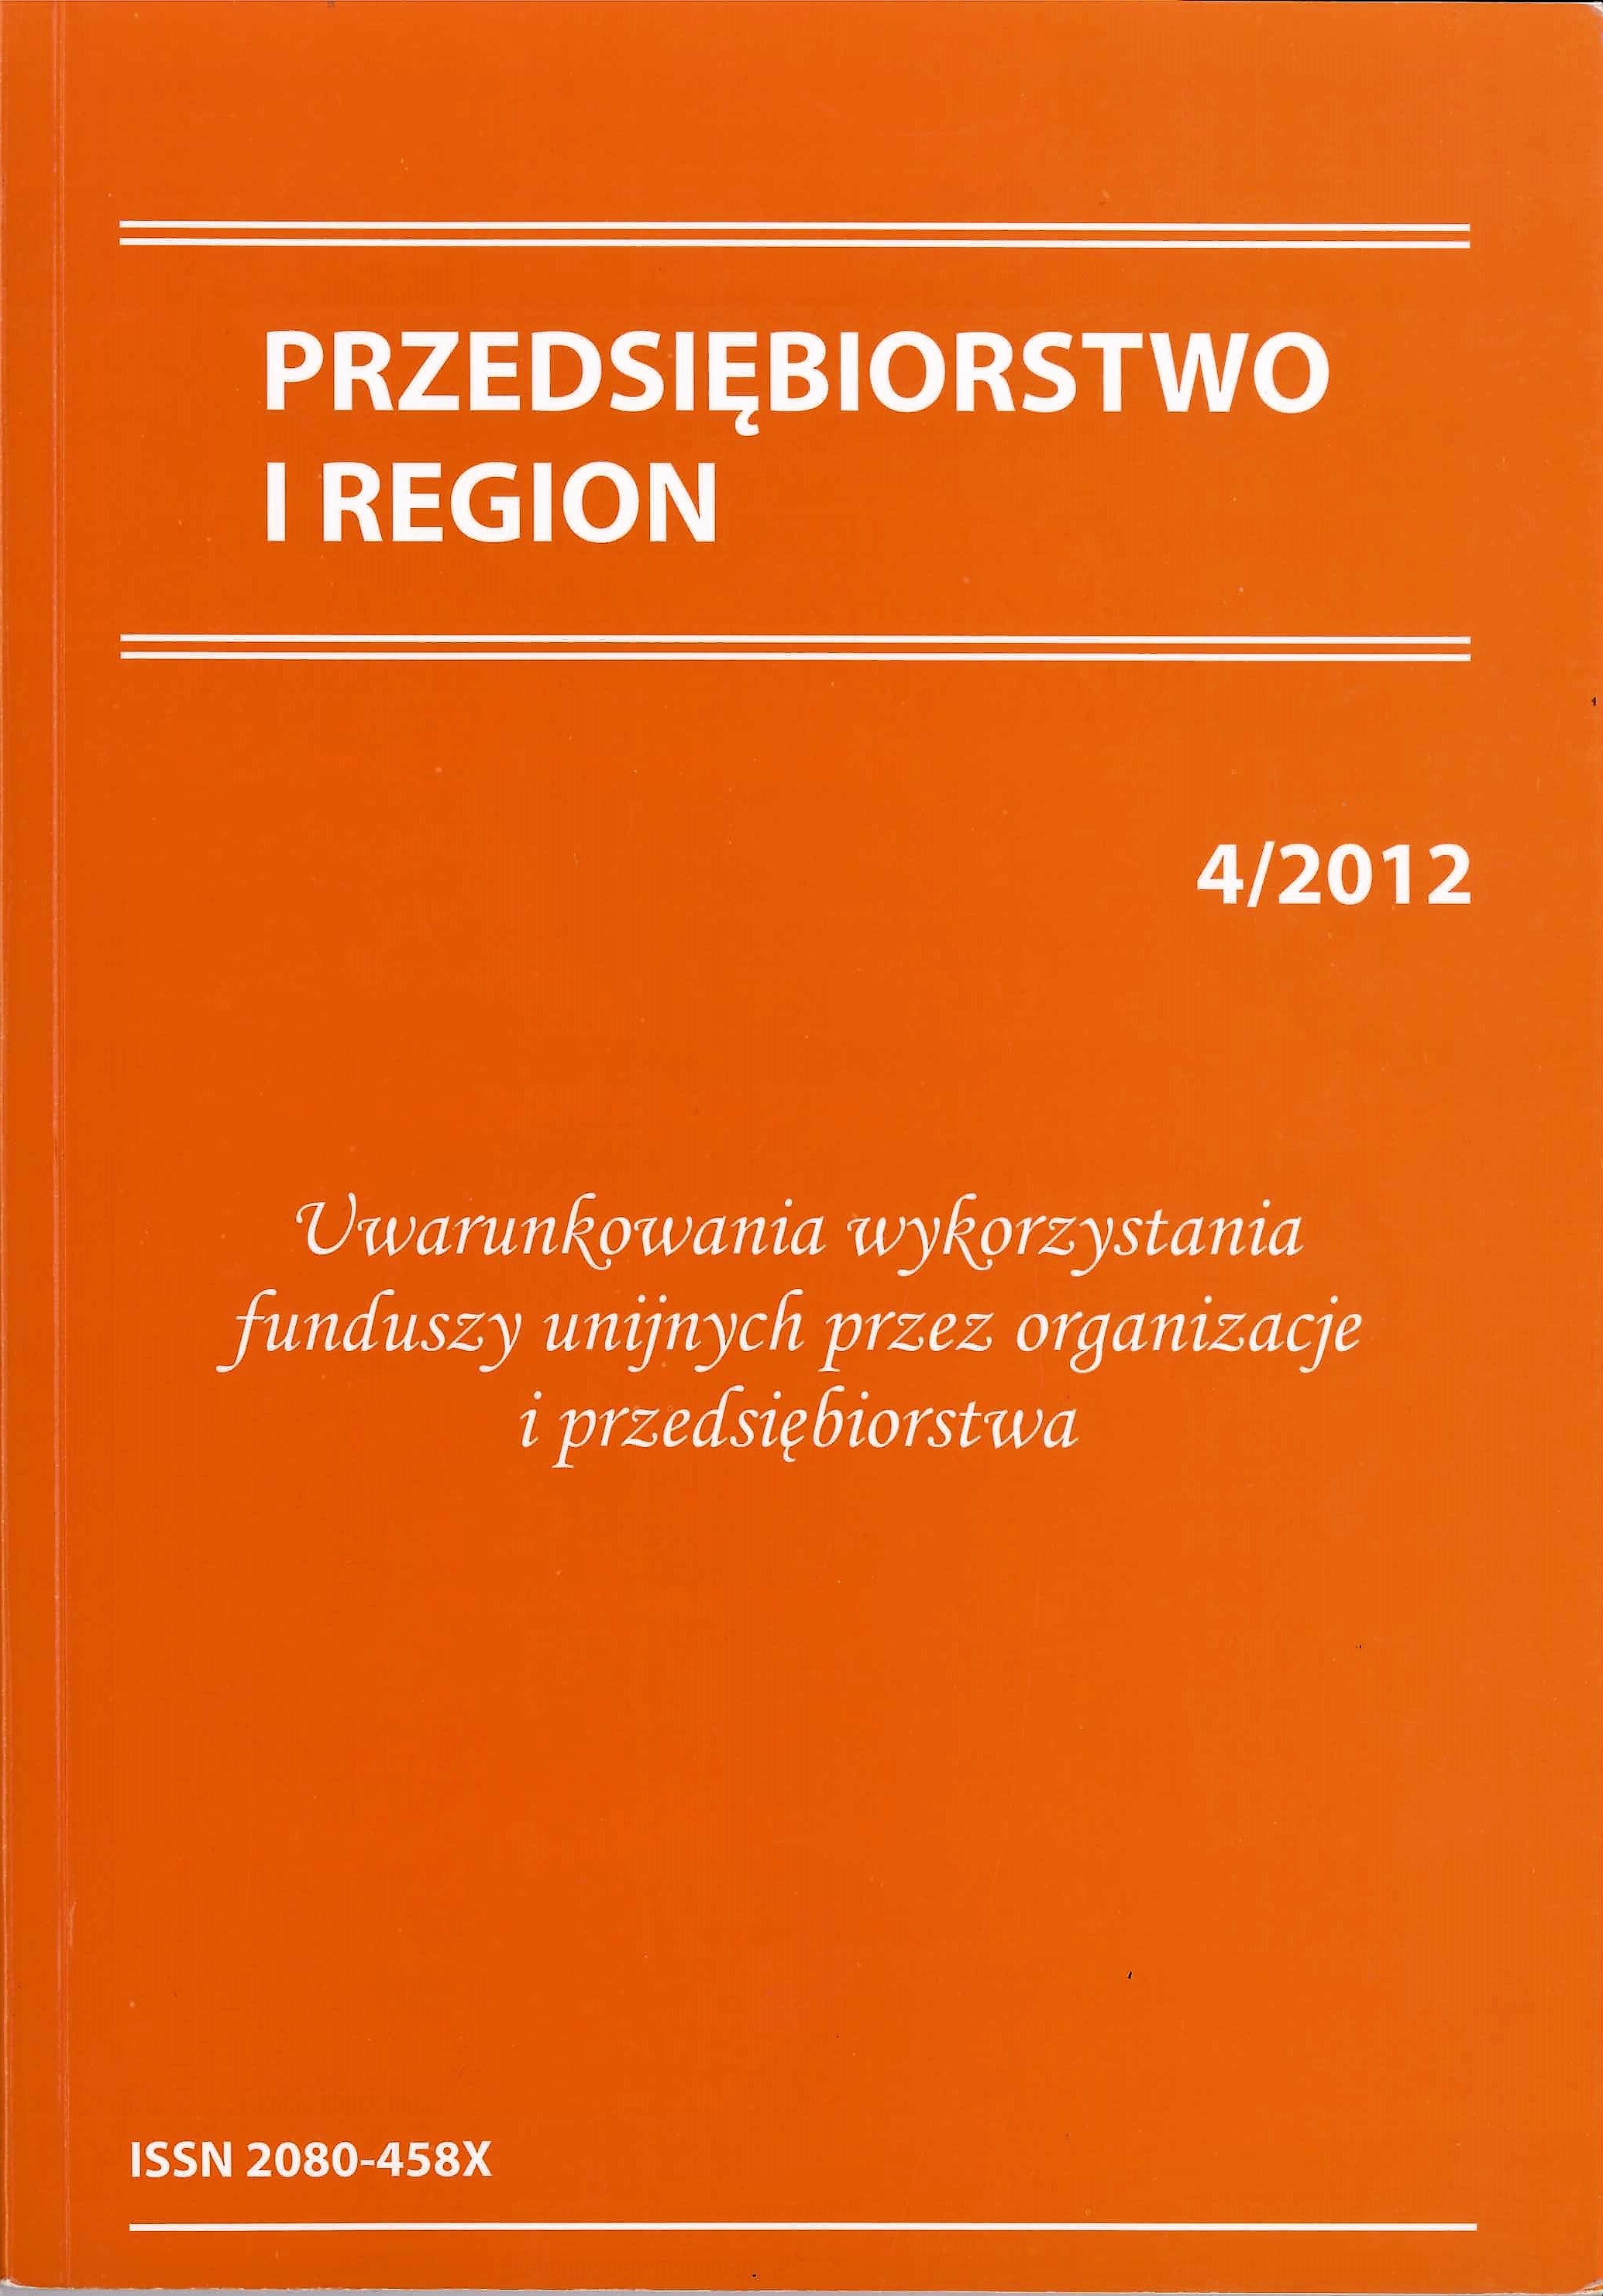 Structural funds of the EU as one of the factors in stimulating innovative activities of enterprises – the review of the funds accessible in the programming period 2007-2013 in Podkarpackie Region Cover Image